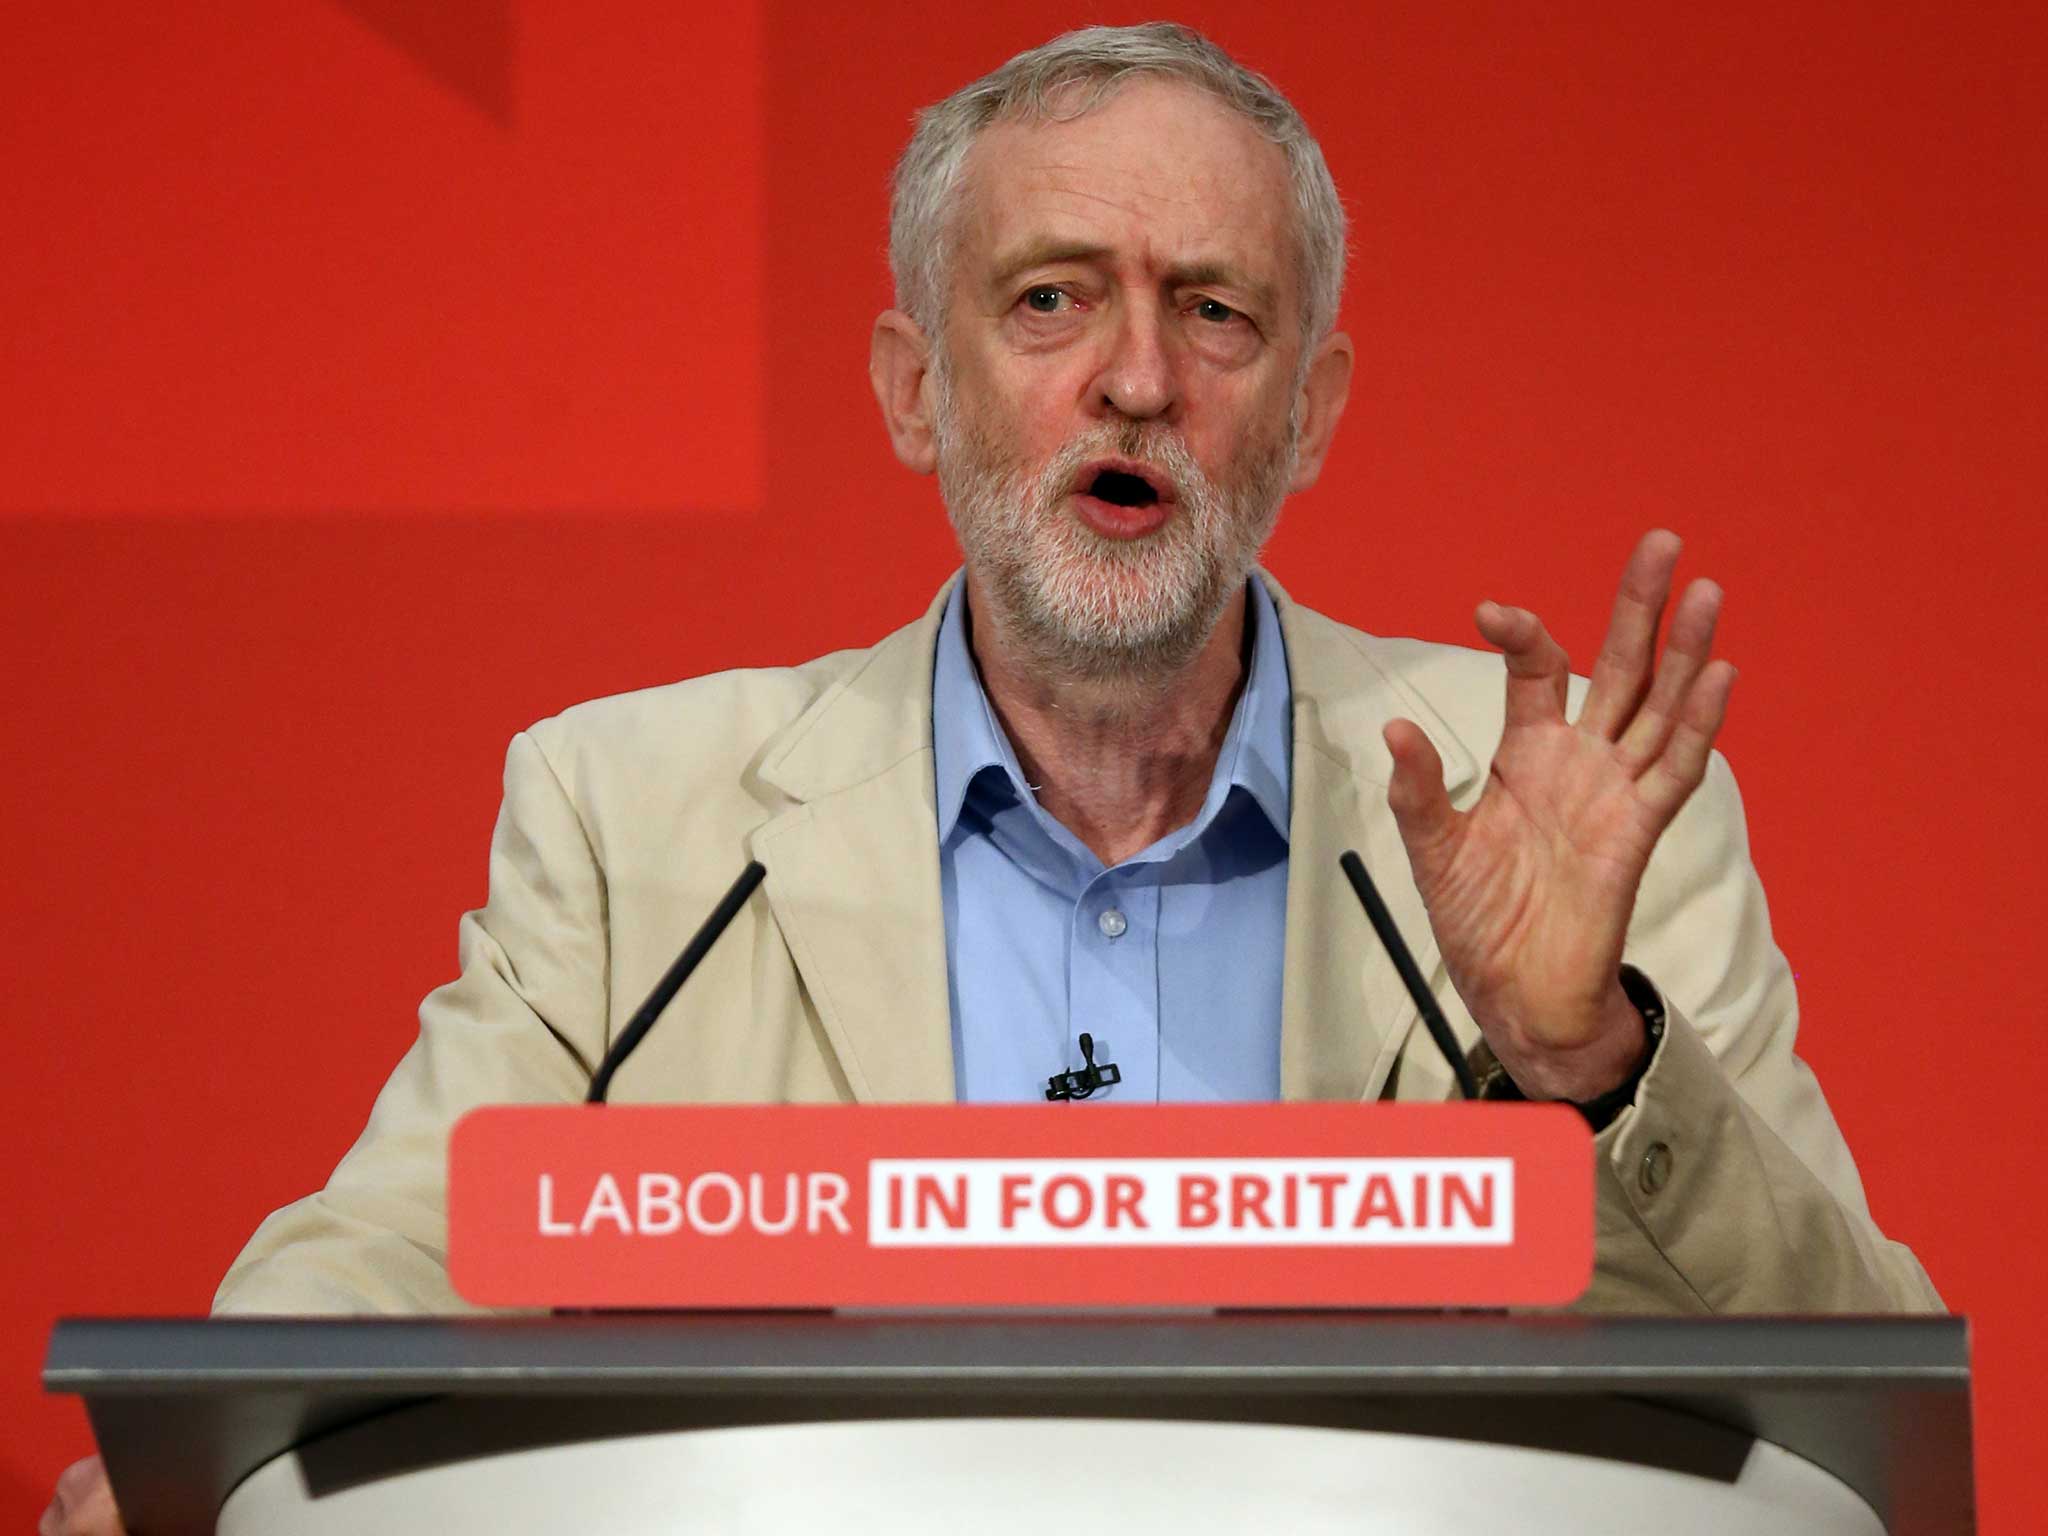 Jeremy Corbyn speaks to state Labour's case for staying in the European Union